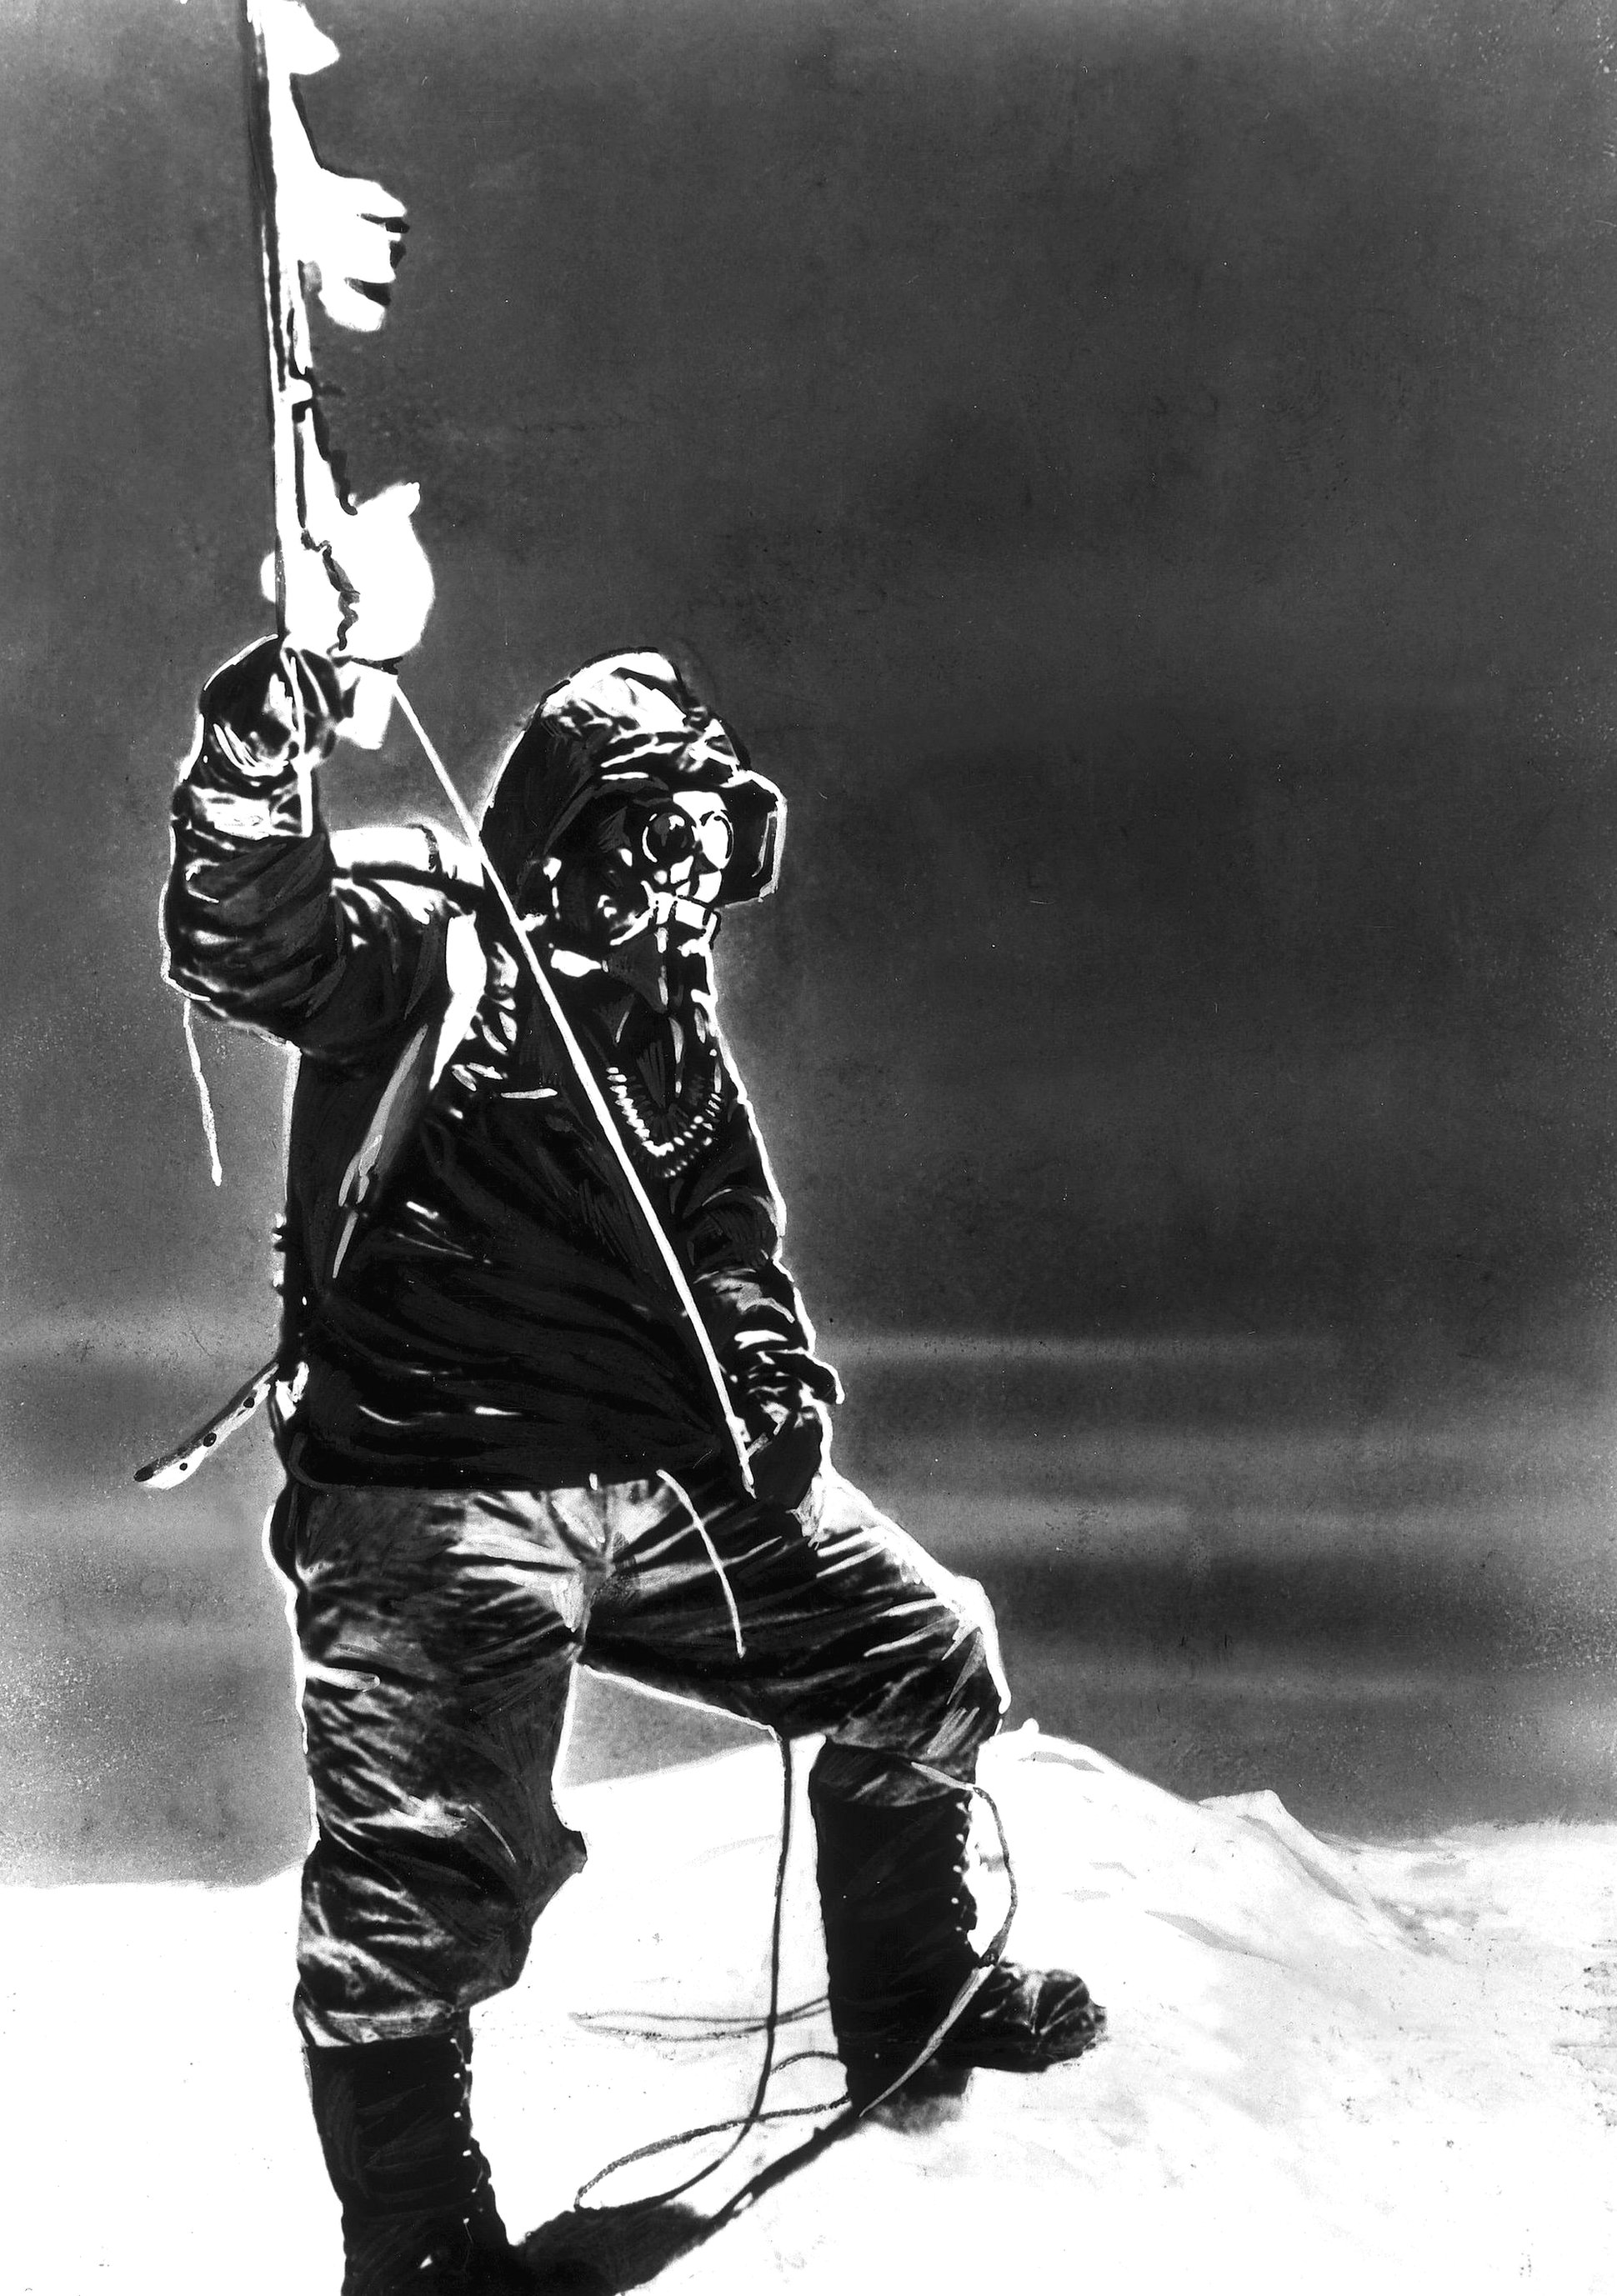 Sherpa Tenzing Norgay (1914 - 1986) holds an ice axe at the summit of Mt. Everest, Nepal, 1953